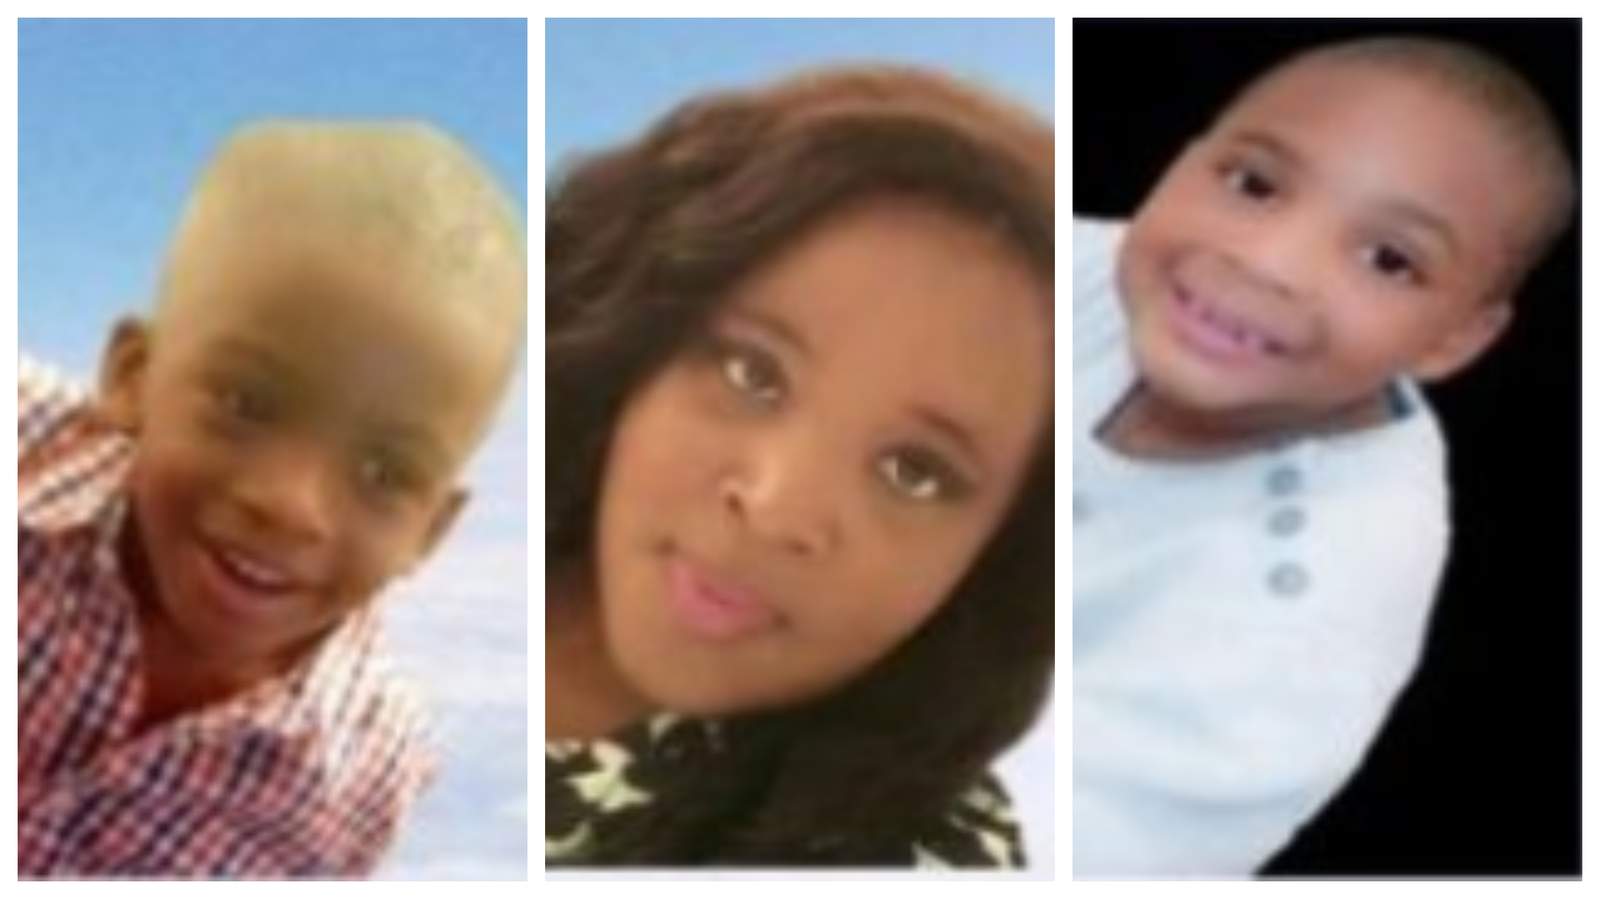 2 of the 4 children injured in north Harris County crash Thursday have died, family says